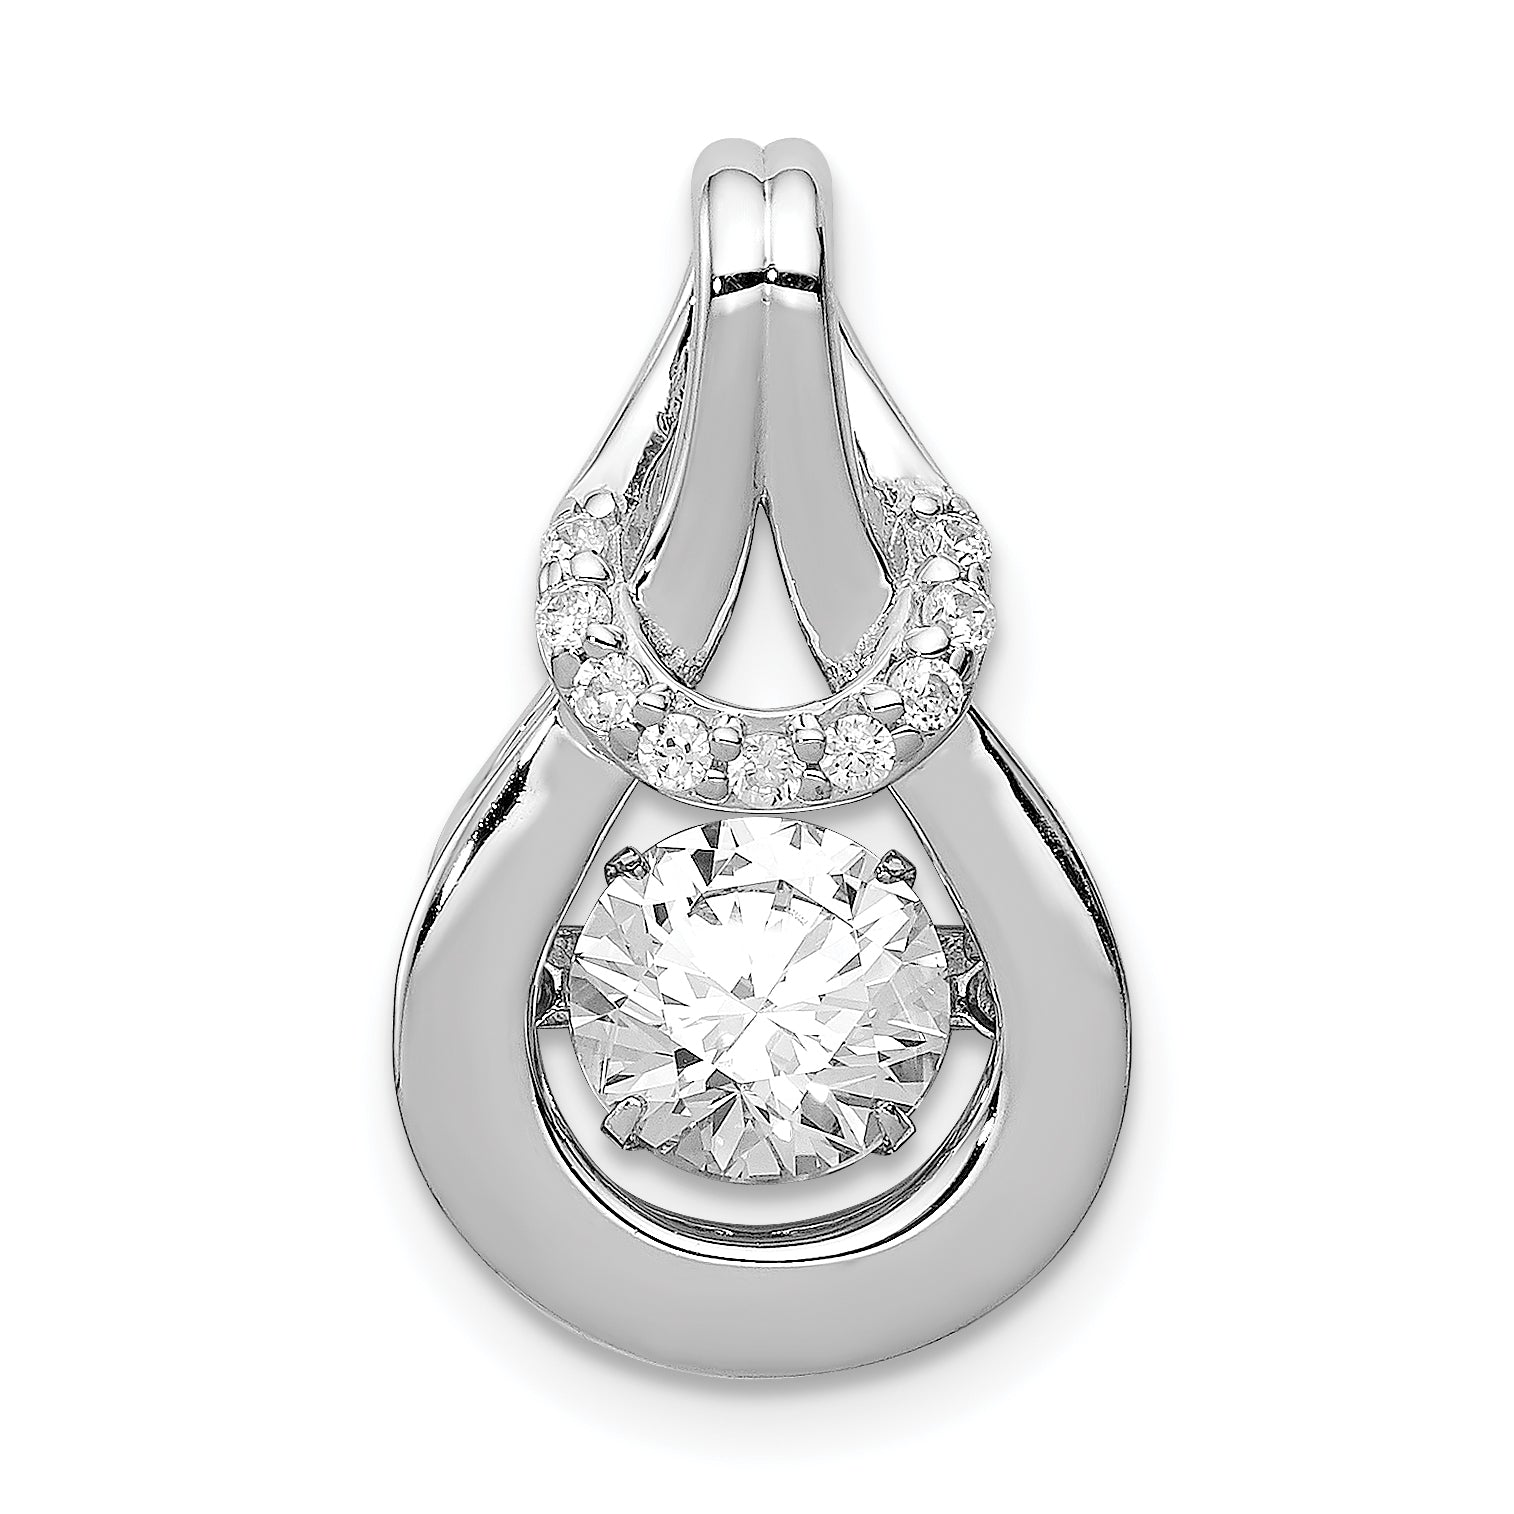 Sterling Silver Platinum-plated Vibrant CZ Knot Pendant